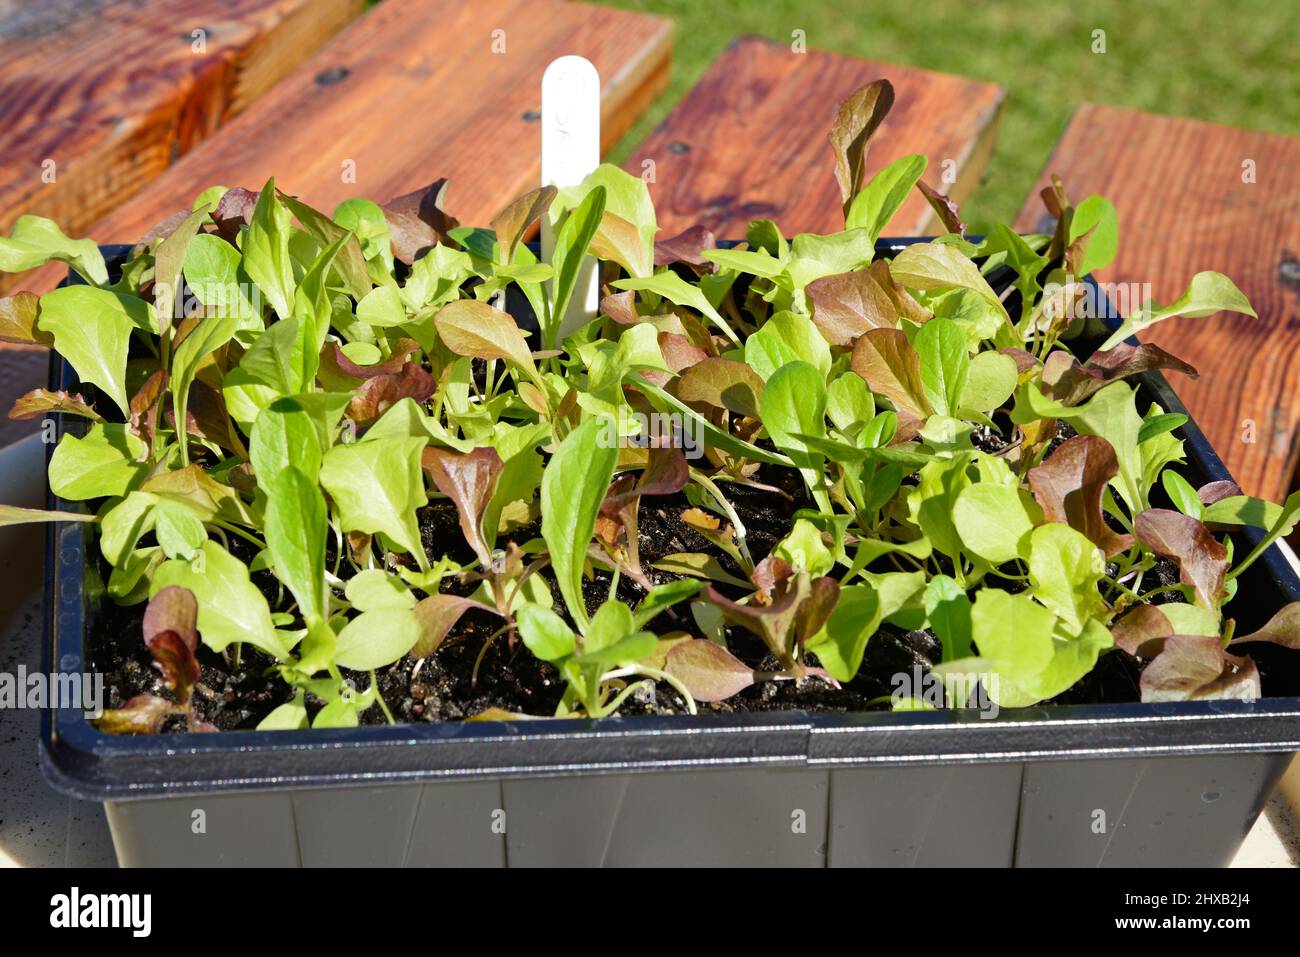 Cut and come again lettuce seedlings in a seed tray, Staffordshire, England, UK, Europe. Stock Photo